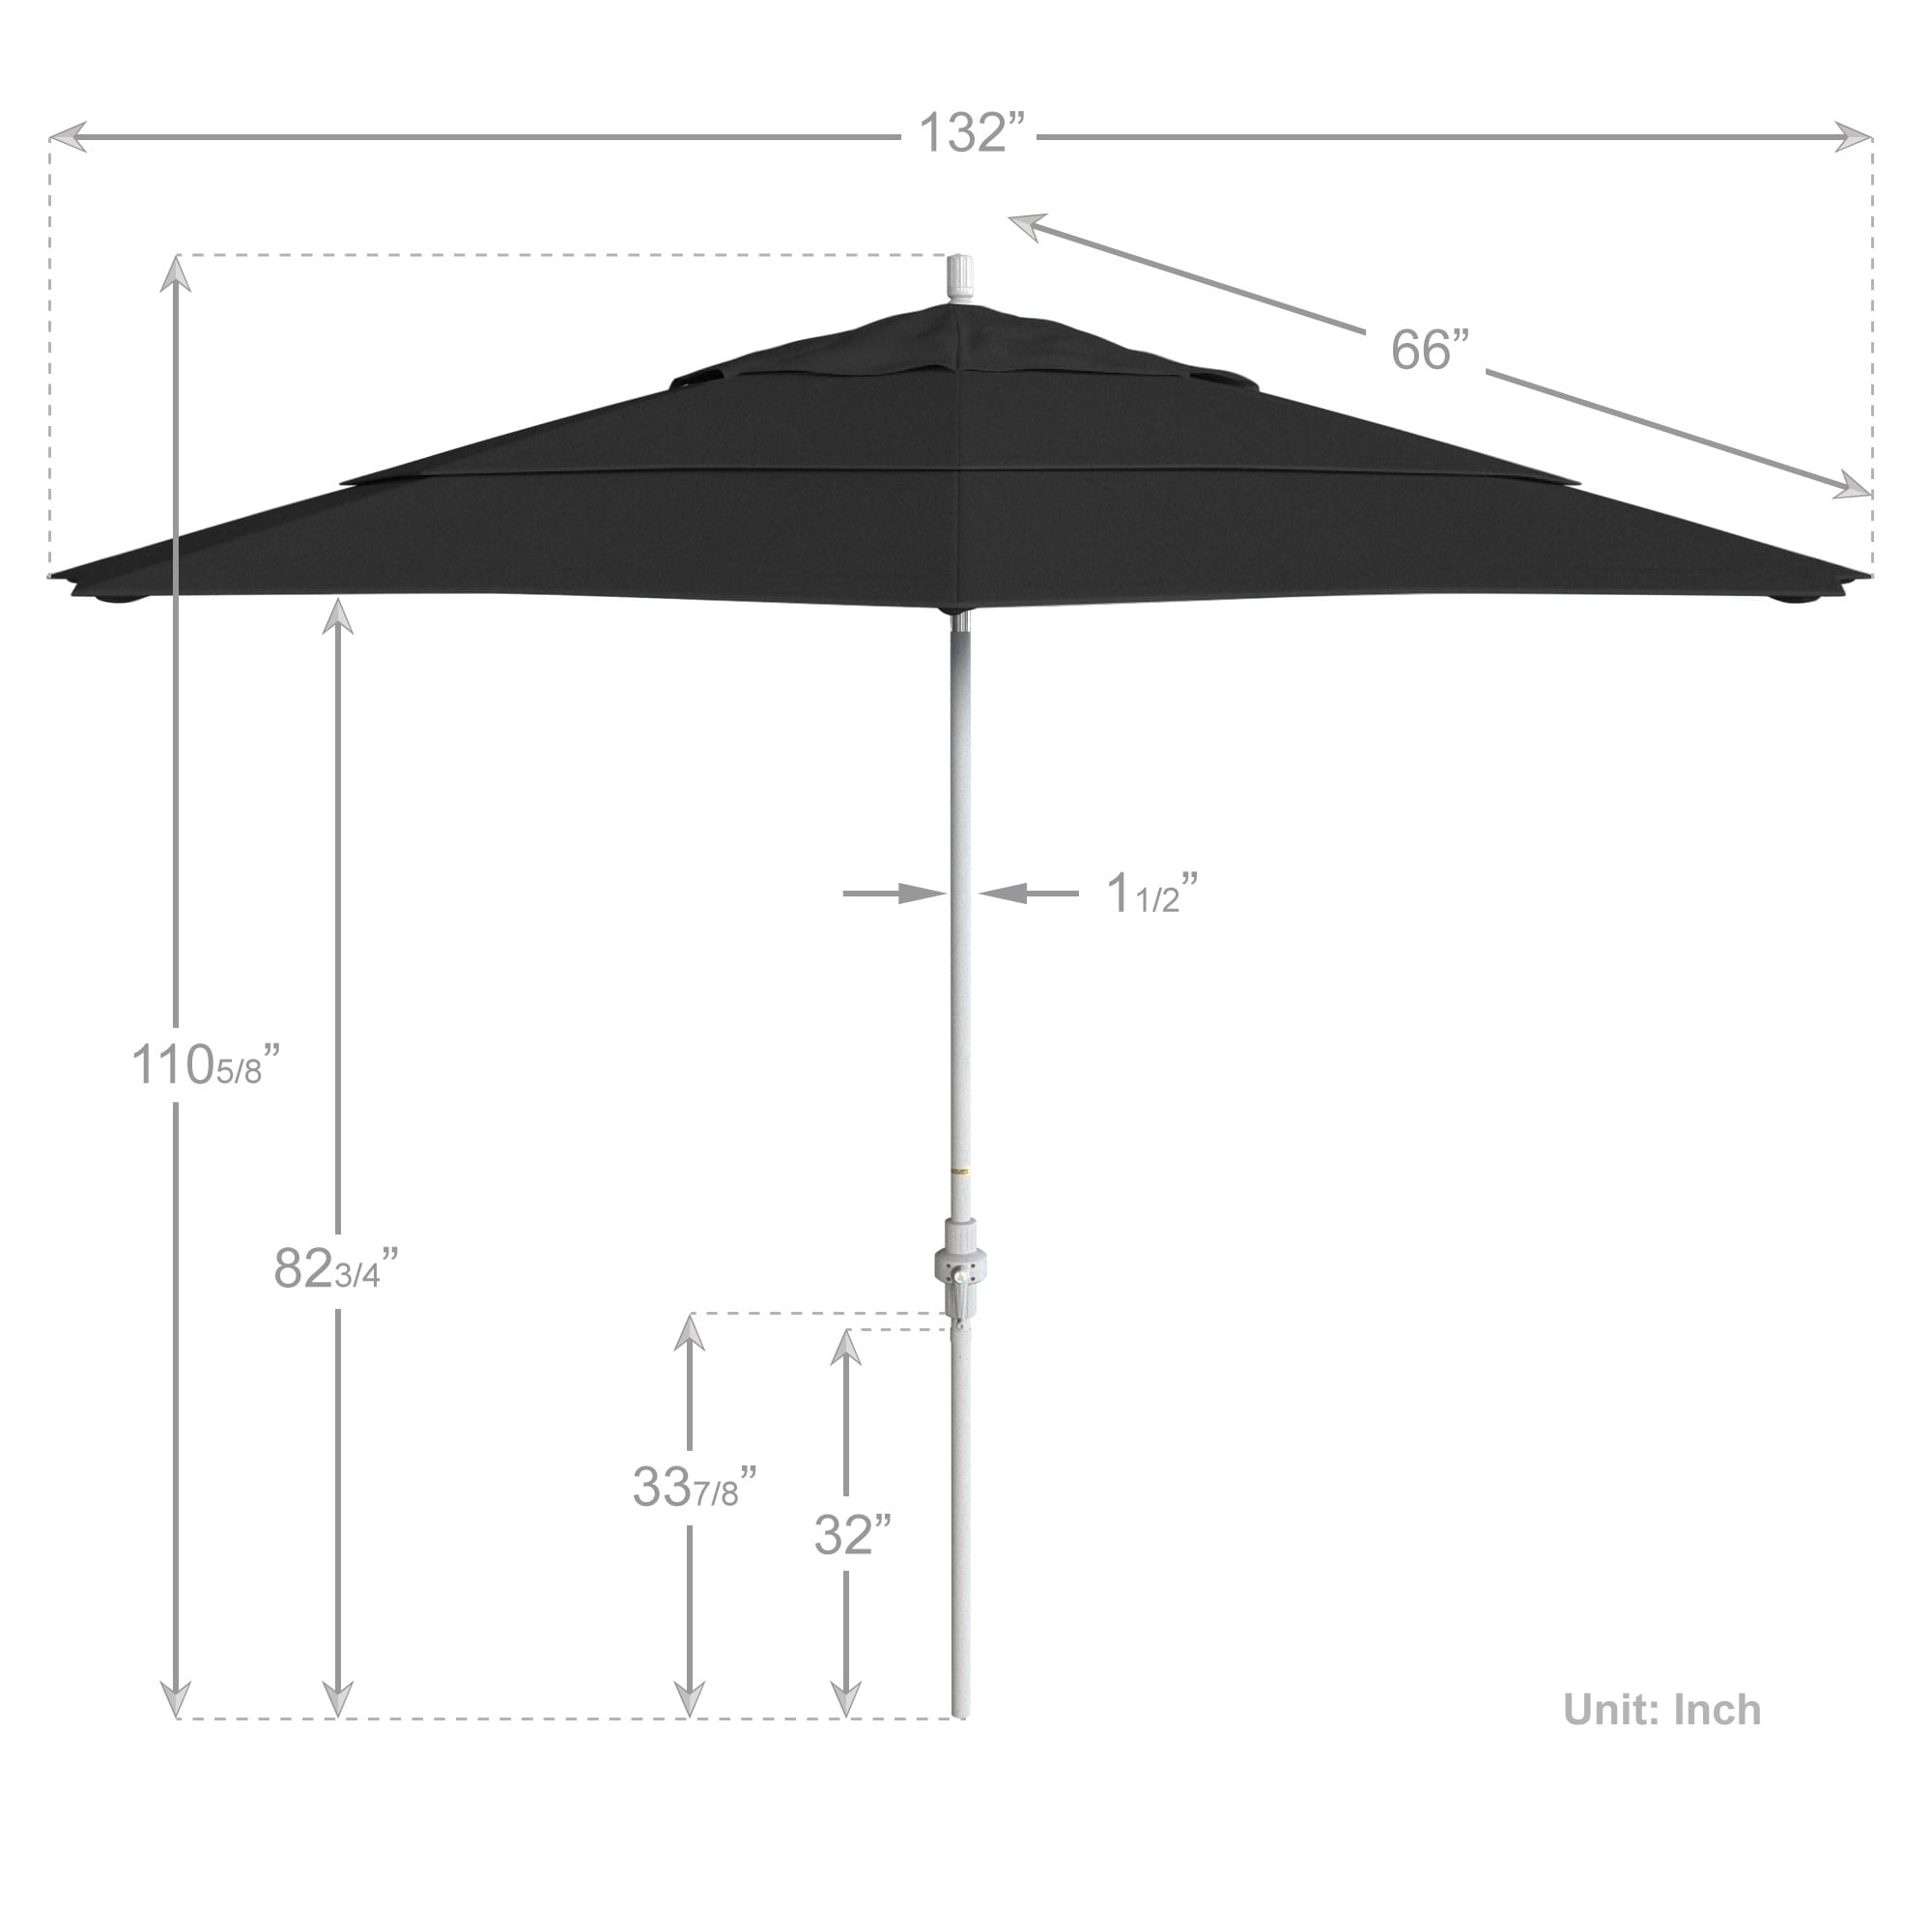 Havenside Home Perry 11ft Crank Lift Aluminum Round Umbrella by , Base Not Included Black - image 5 of 5